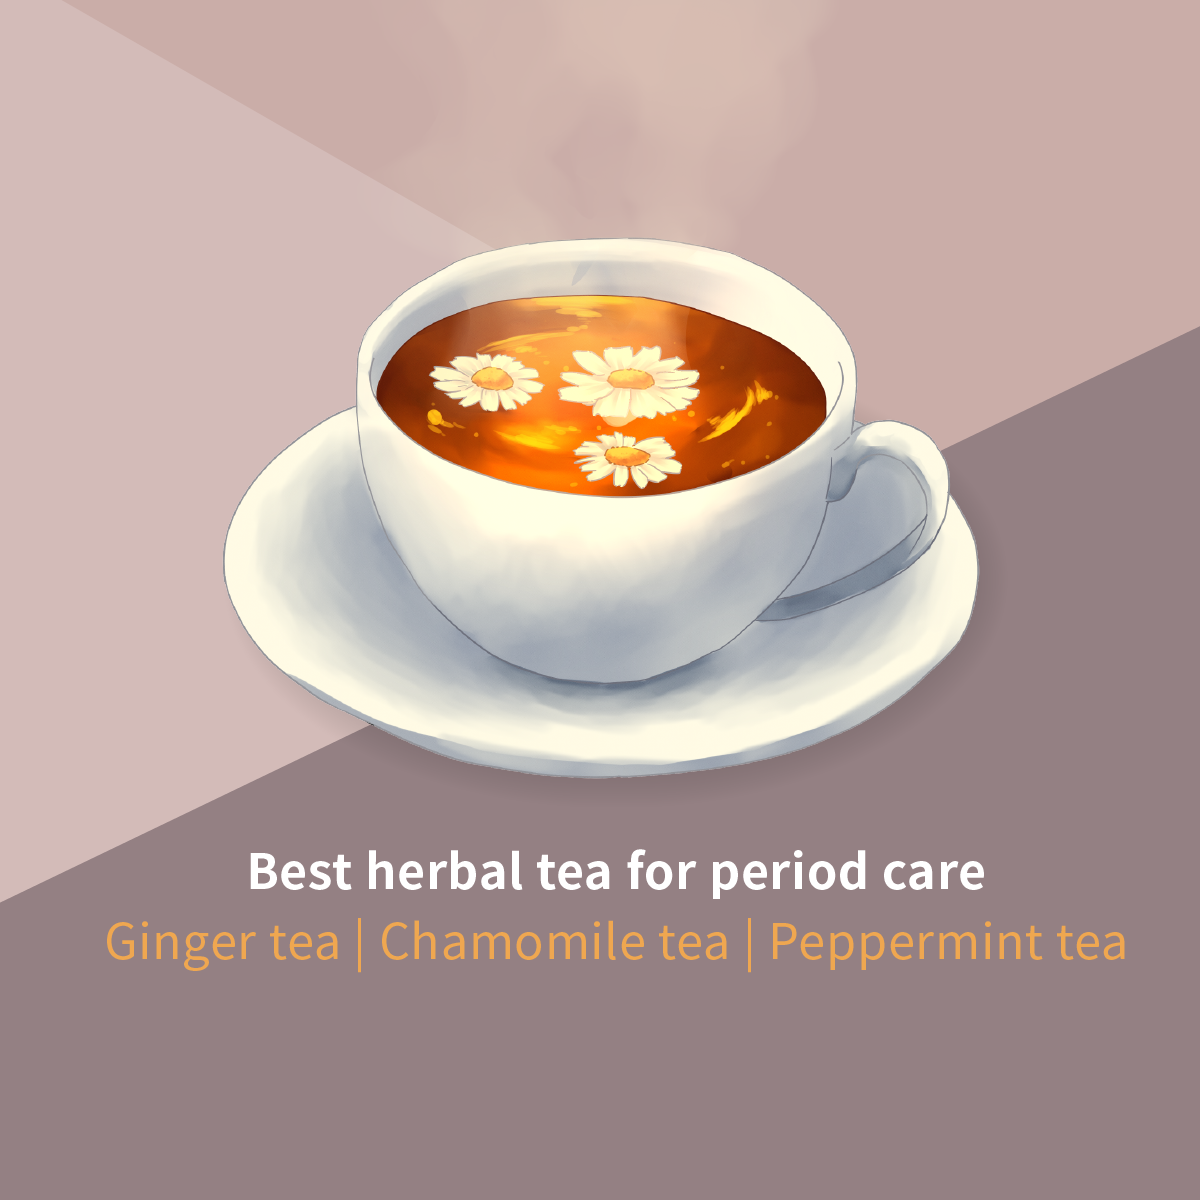 Best herbal tea for period care